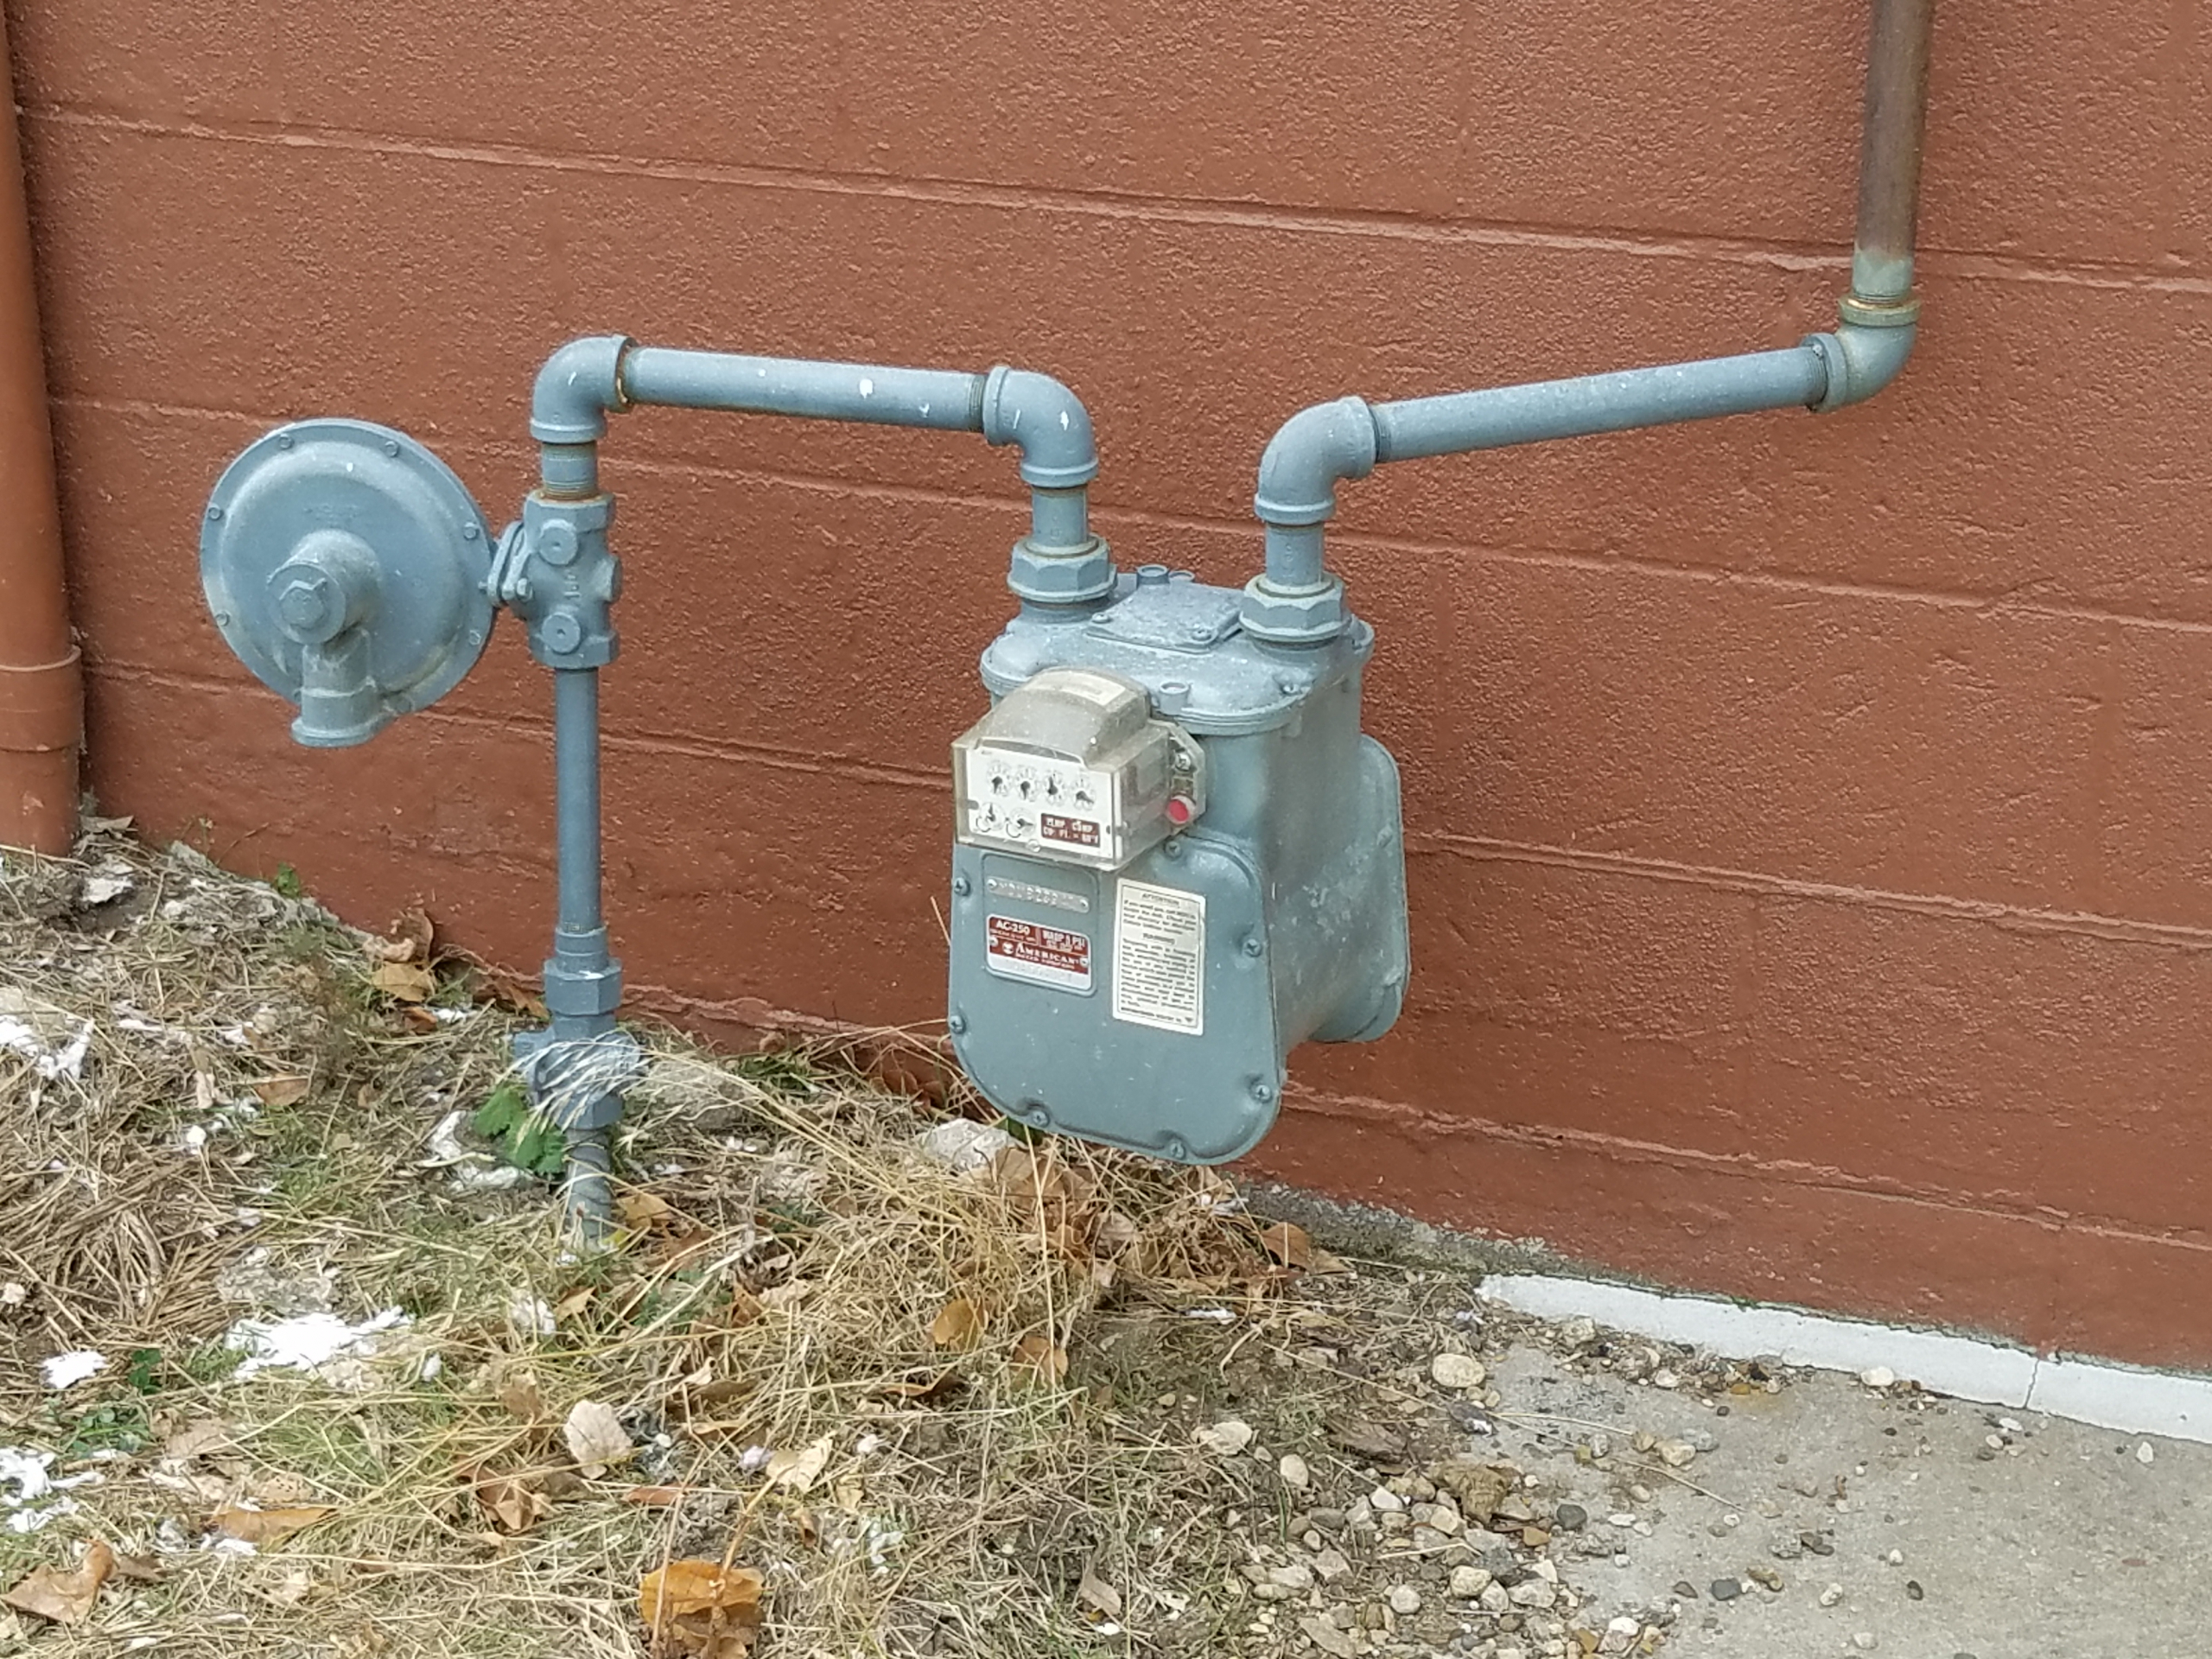 Winter Storm Brings Reminders To Watch Gas Meters During Winter Weather